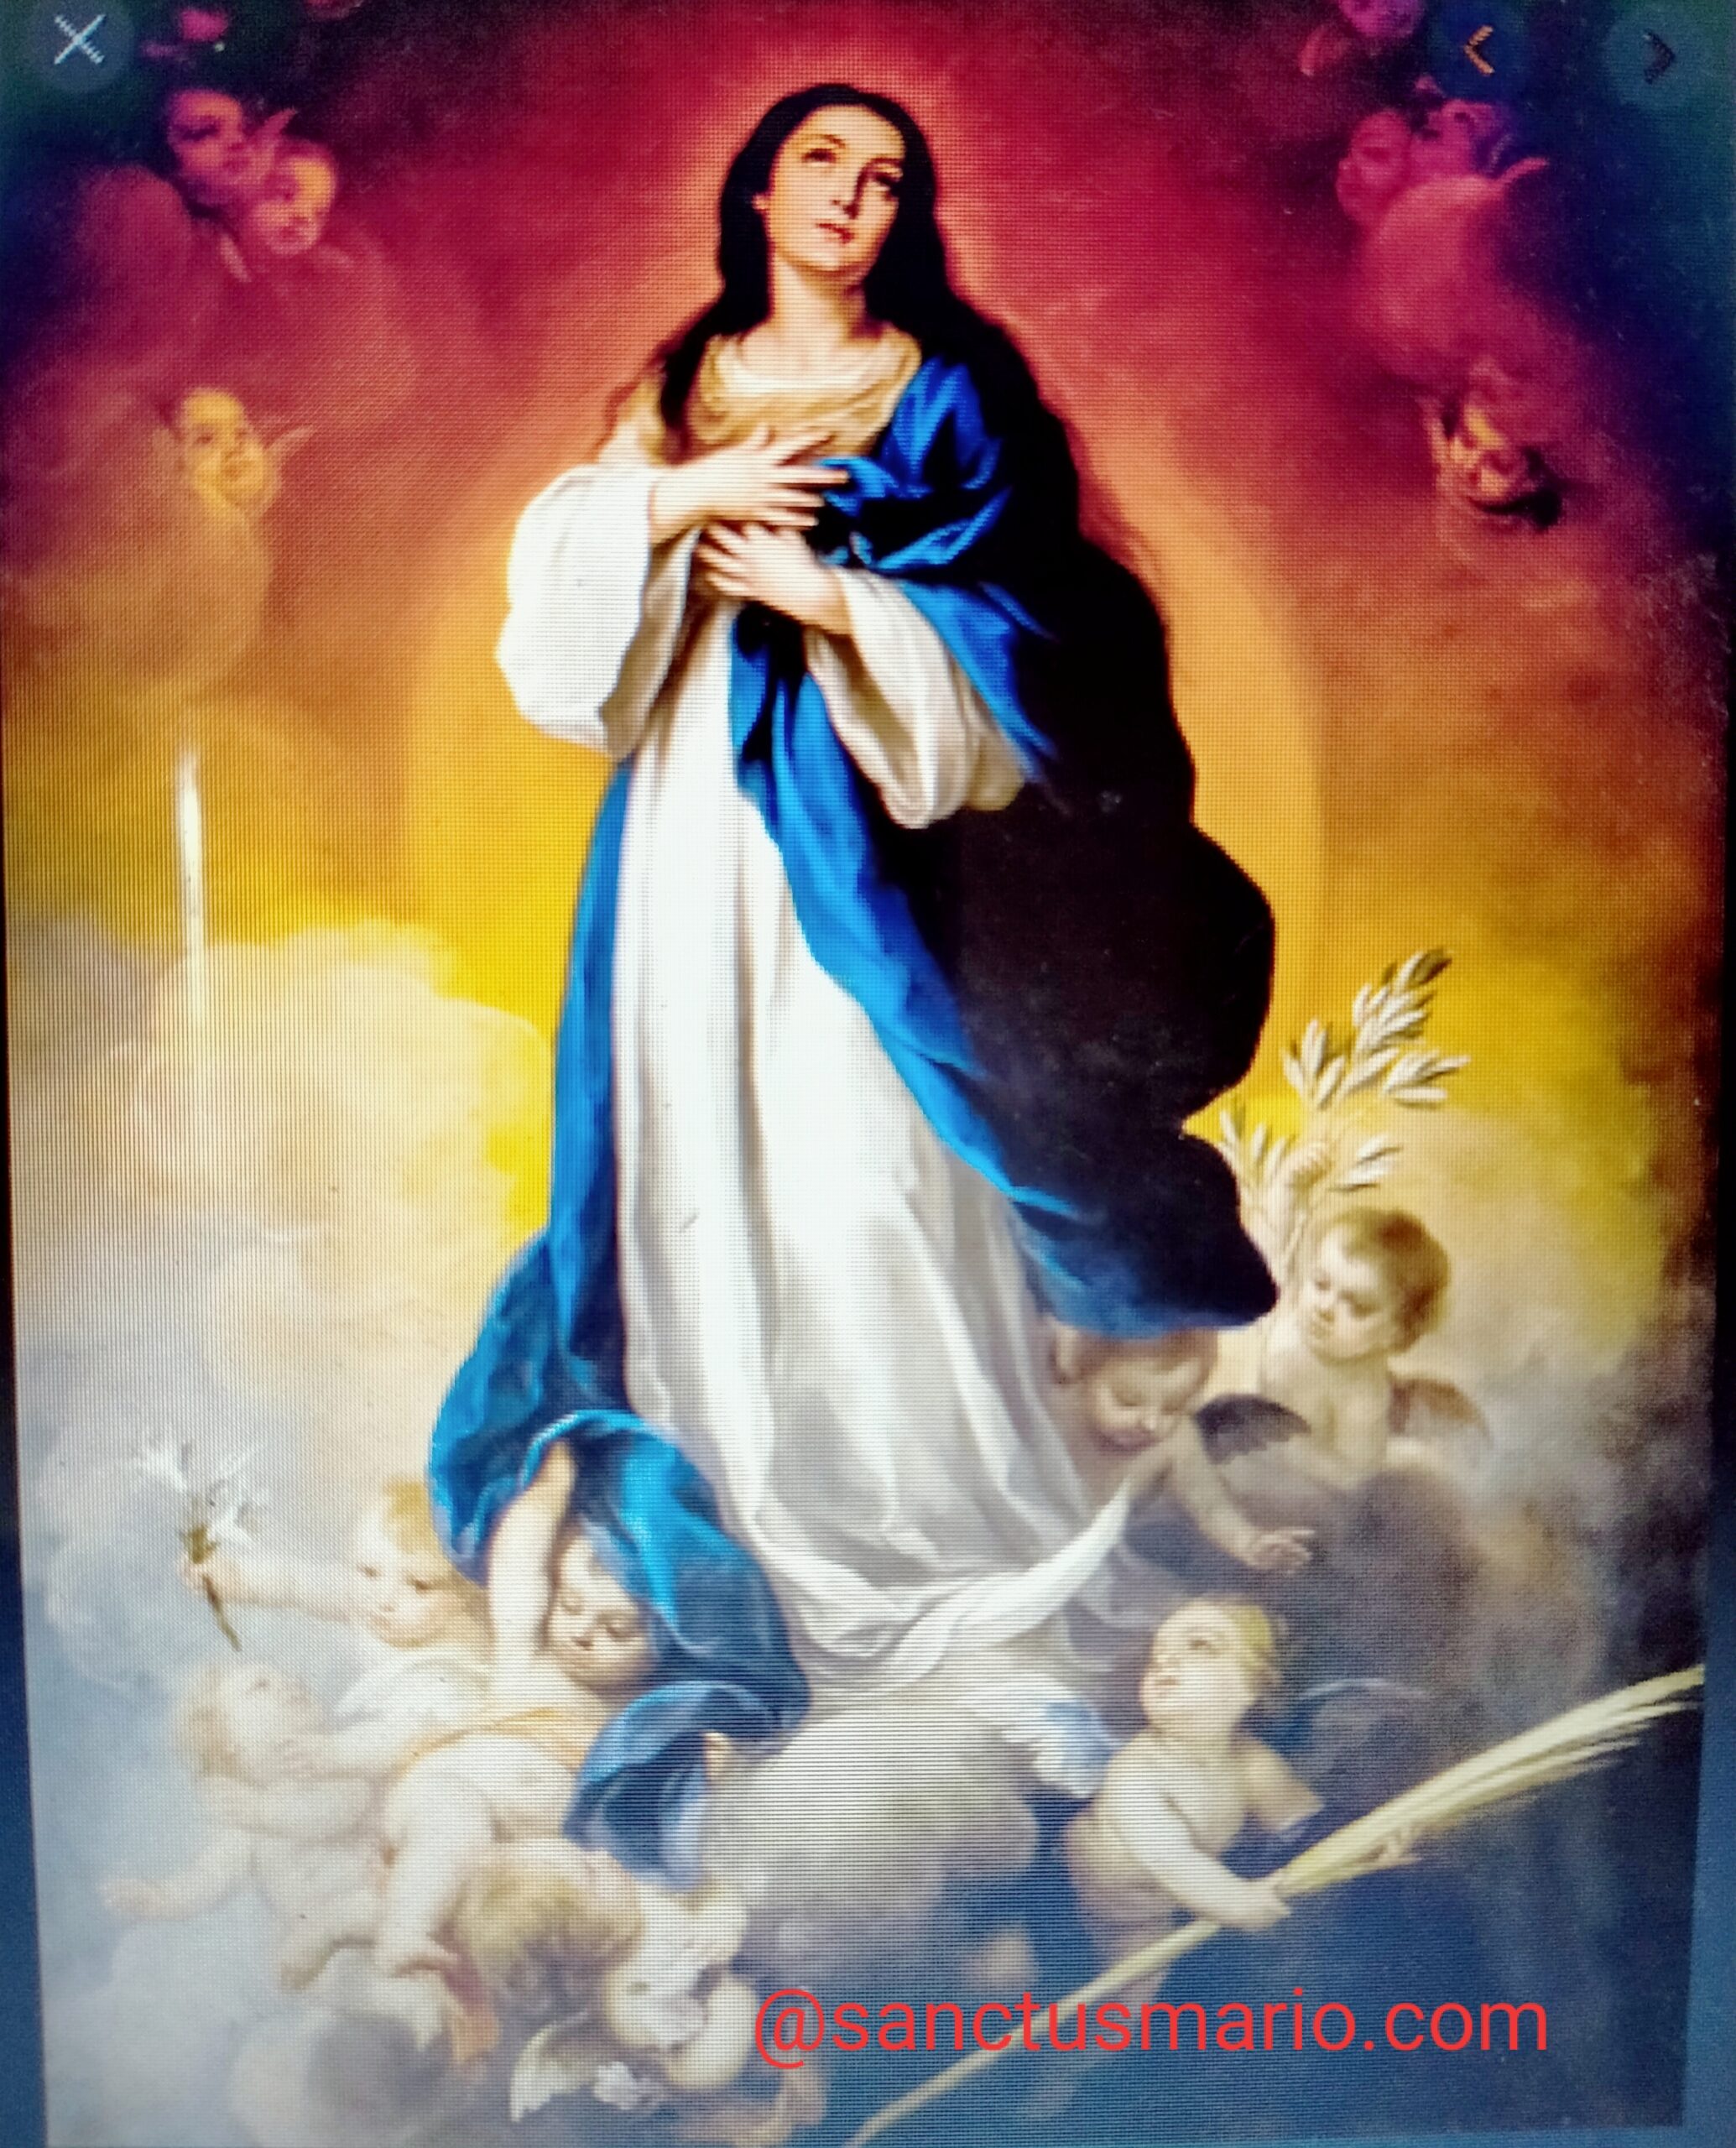 Mary Is Immaculate Solemnity Of The Immaculate Conception Fr Sanctus Mario